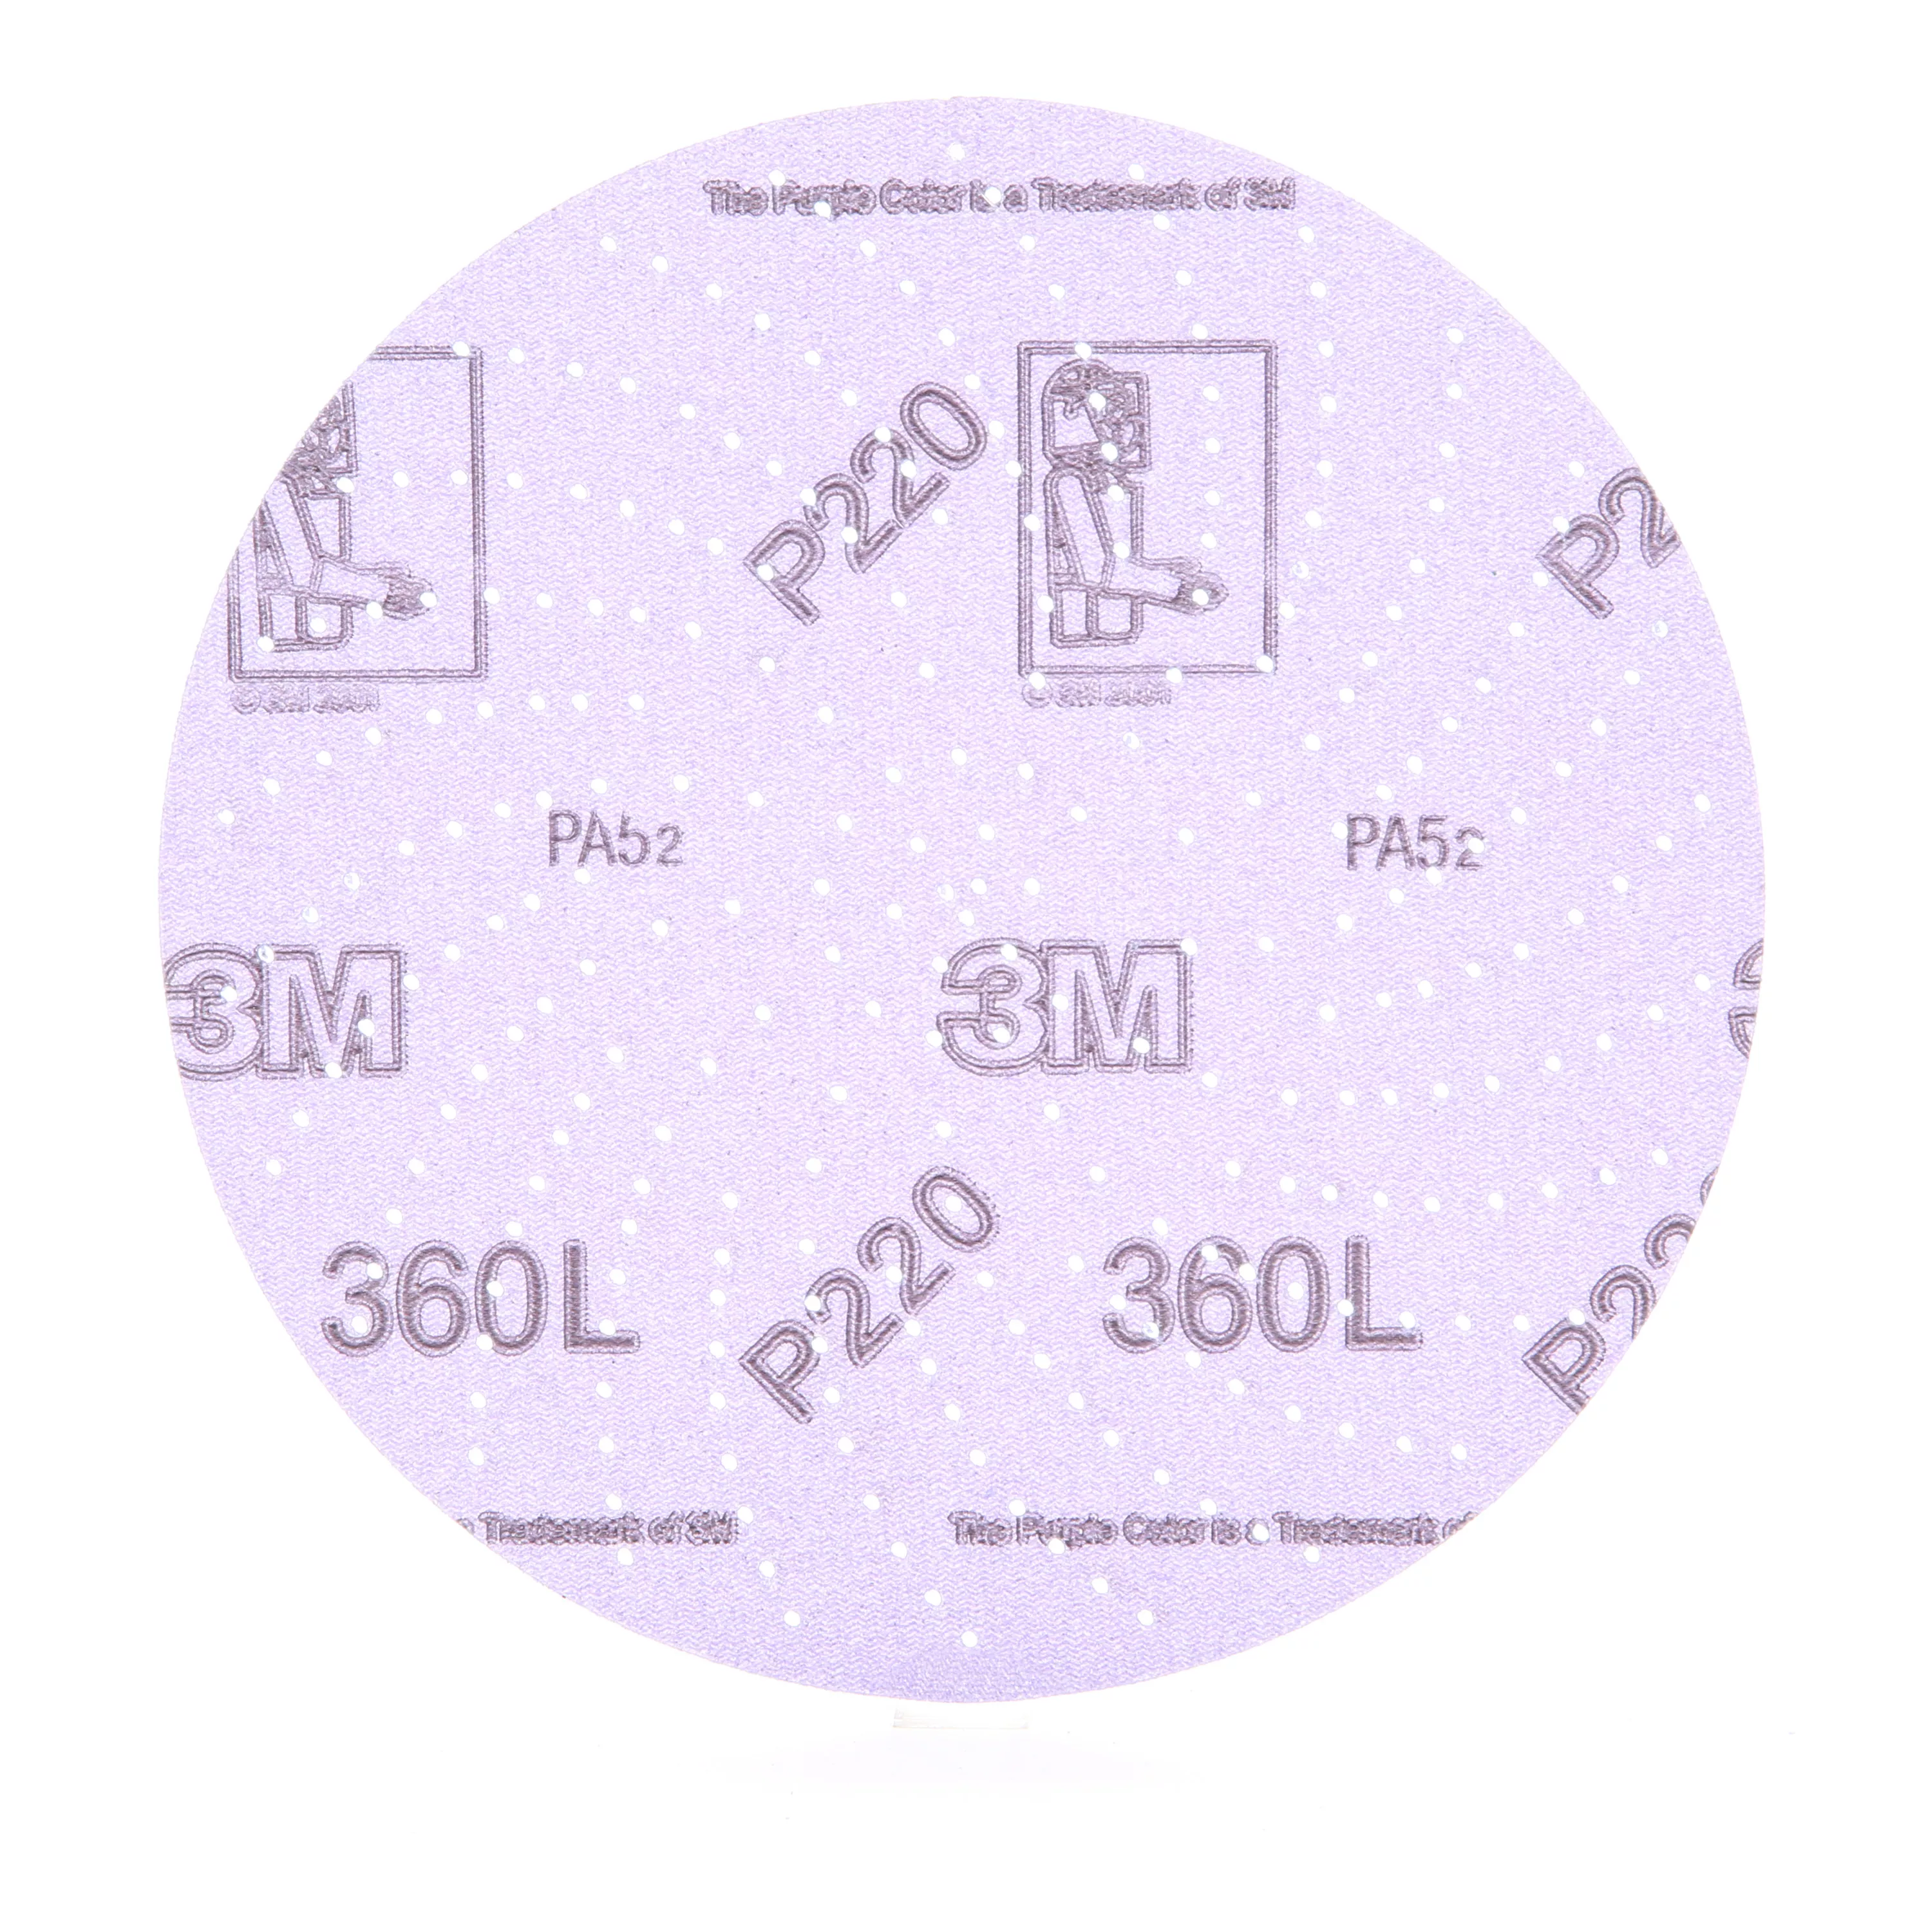 3M Xtract™ Film Disc 360L, P220 3MIL, 6 in, Die 600LG, 50/Pack, 500
ea/Case, Shrink Wrapped